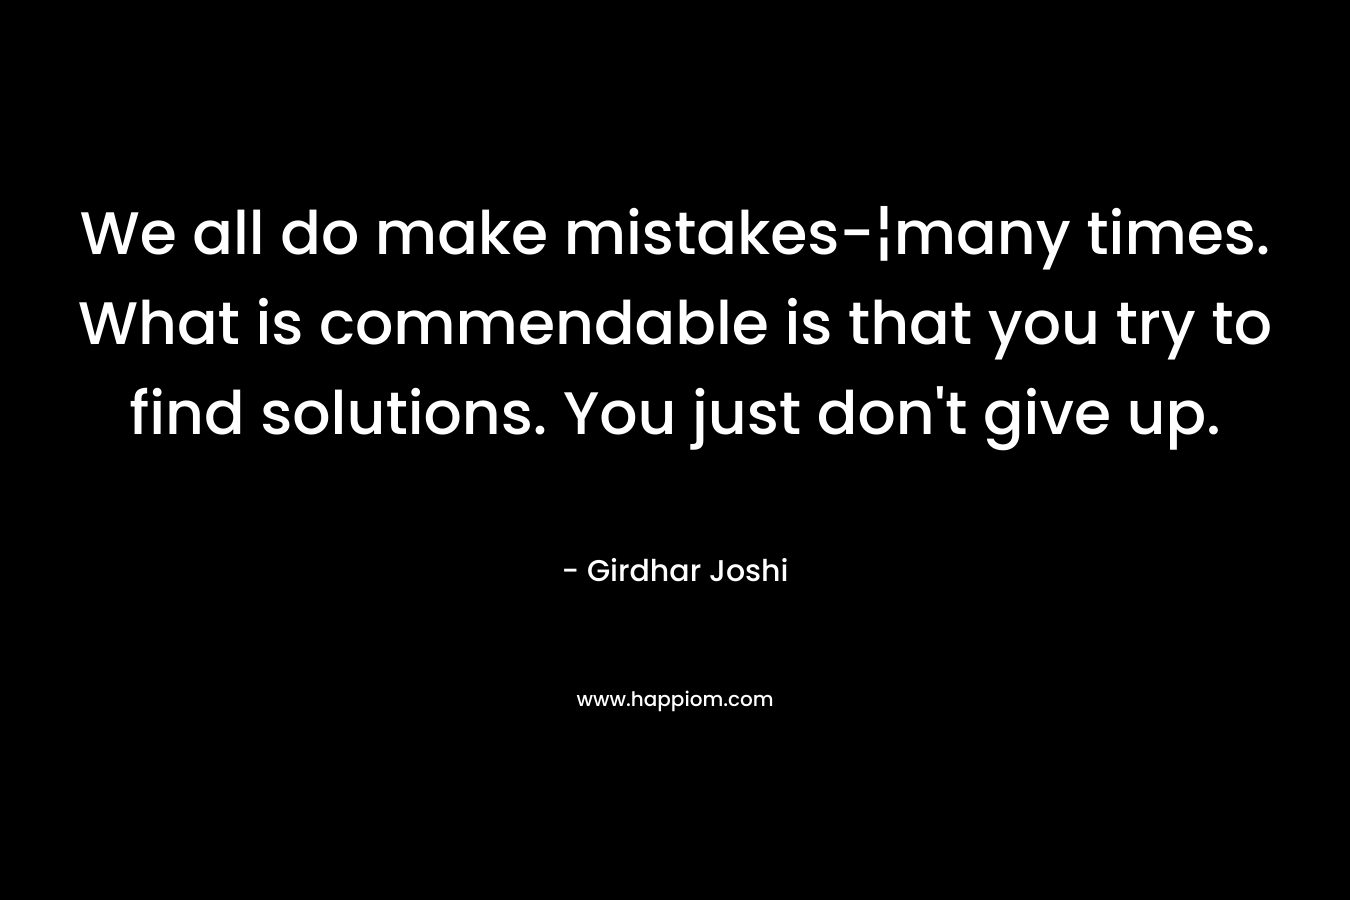 We all do make mistakes-¦many times. What is commendable is that you try to find solutions. You just don’t give up. – Girdhar Joshi